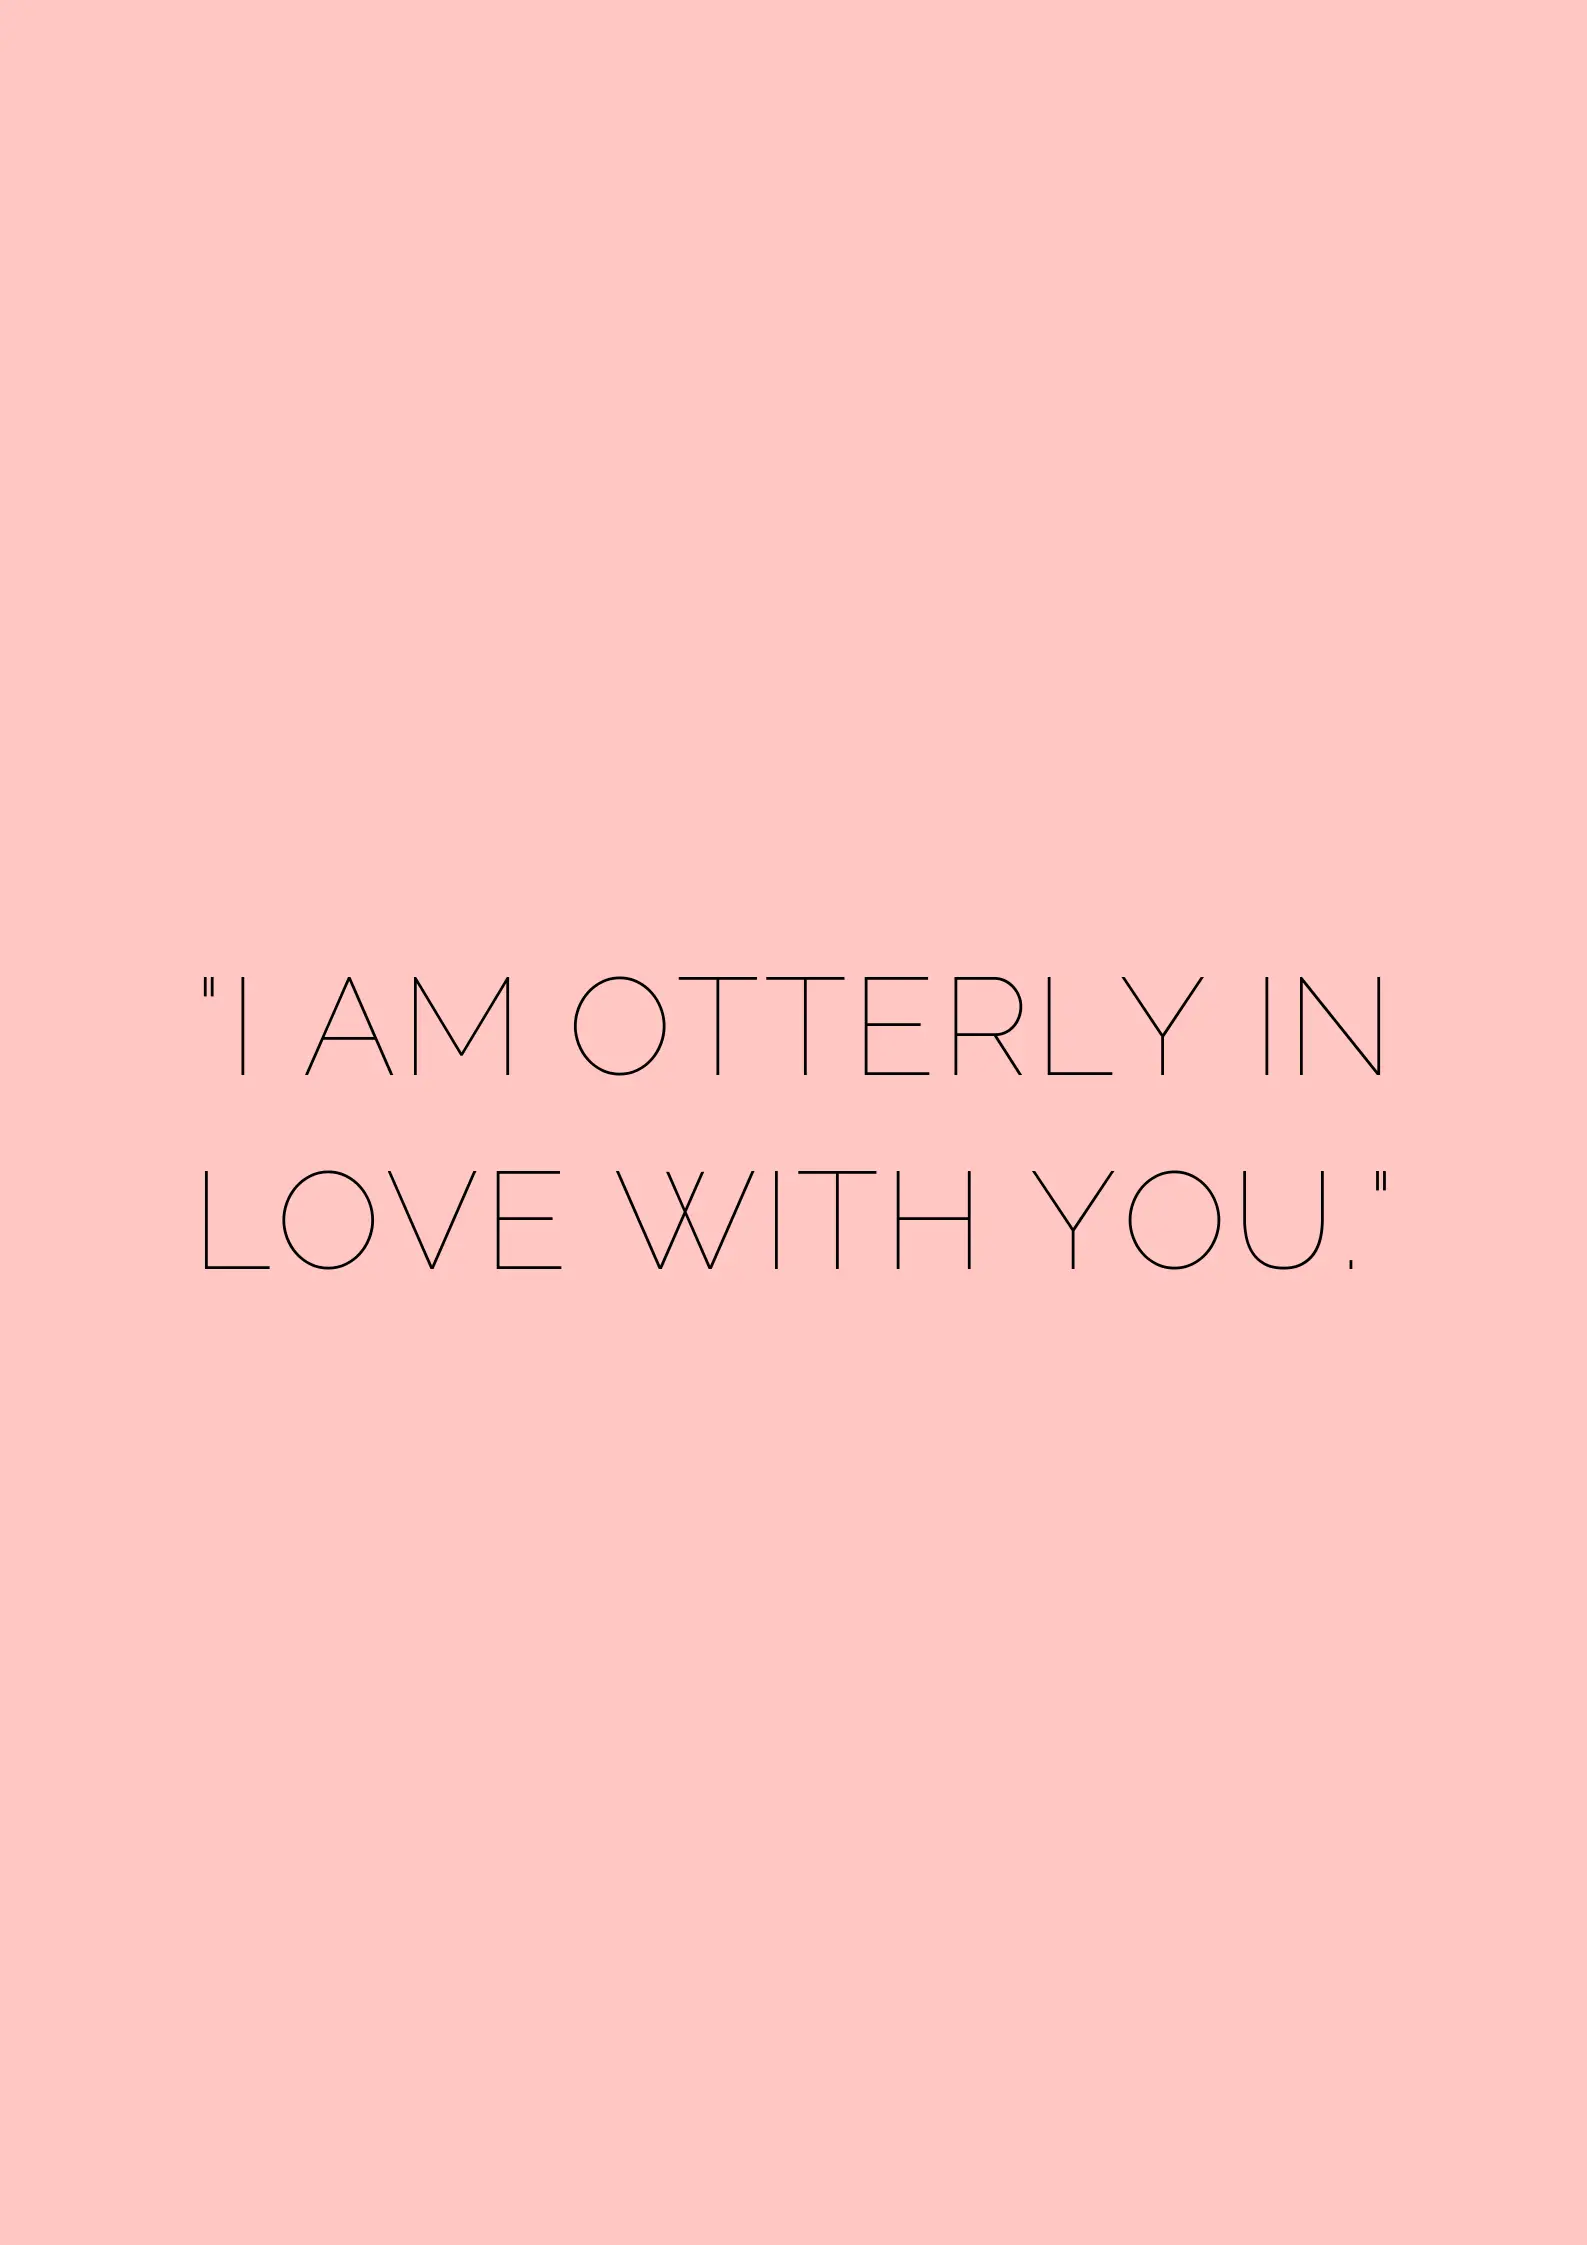 100 More Cute Love Quotes for Her & Him - museuly